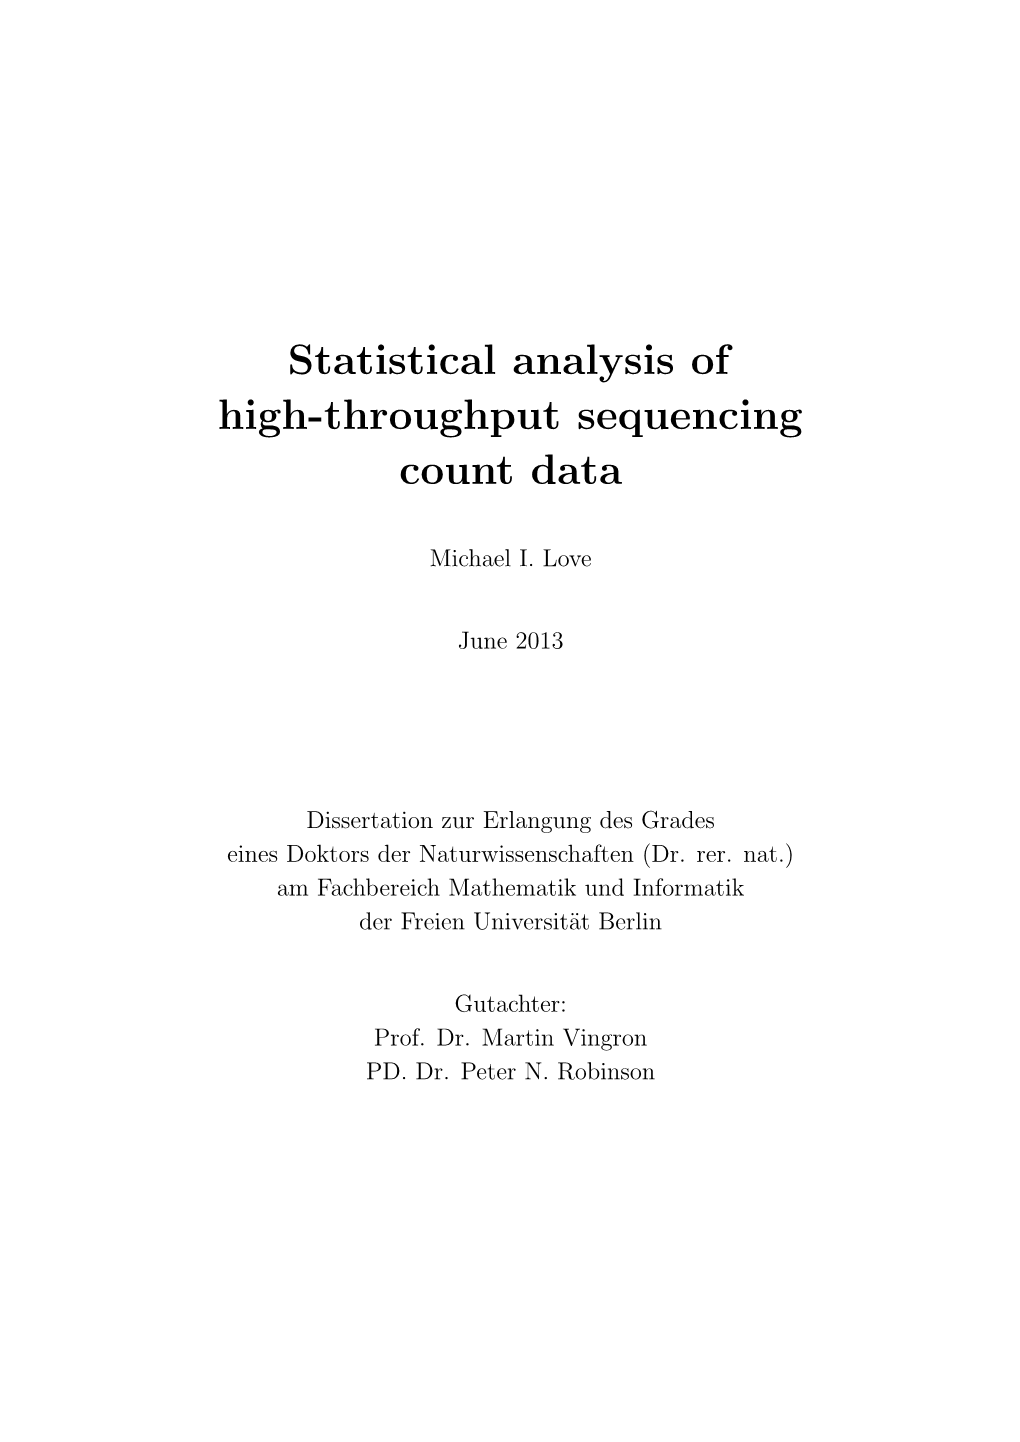 Statistical Analysis of High-Throughput Sequencing Count Data